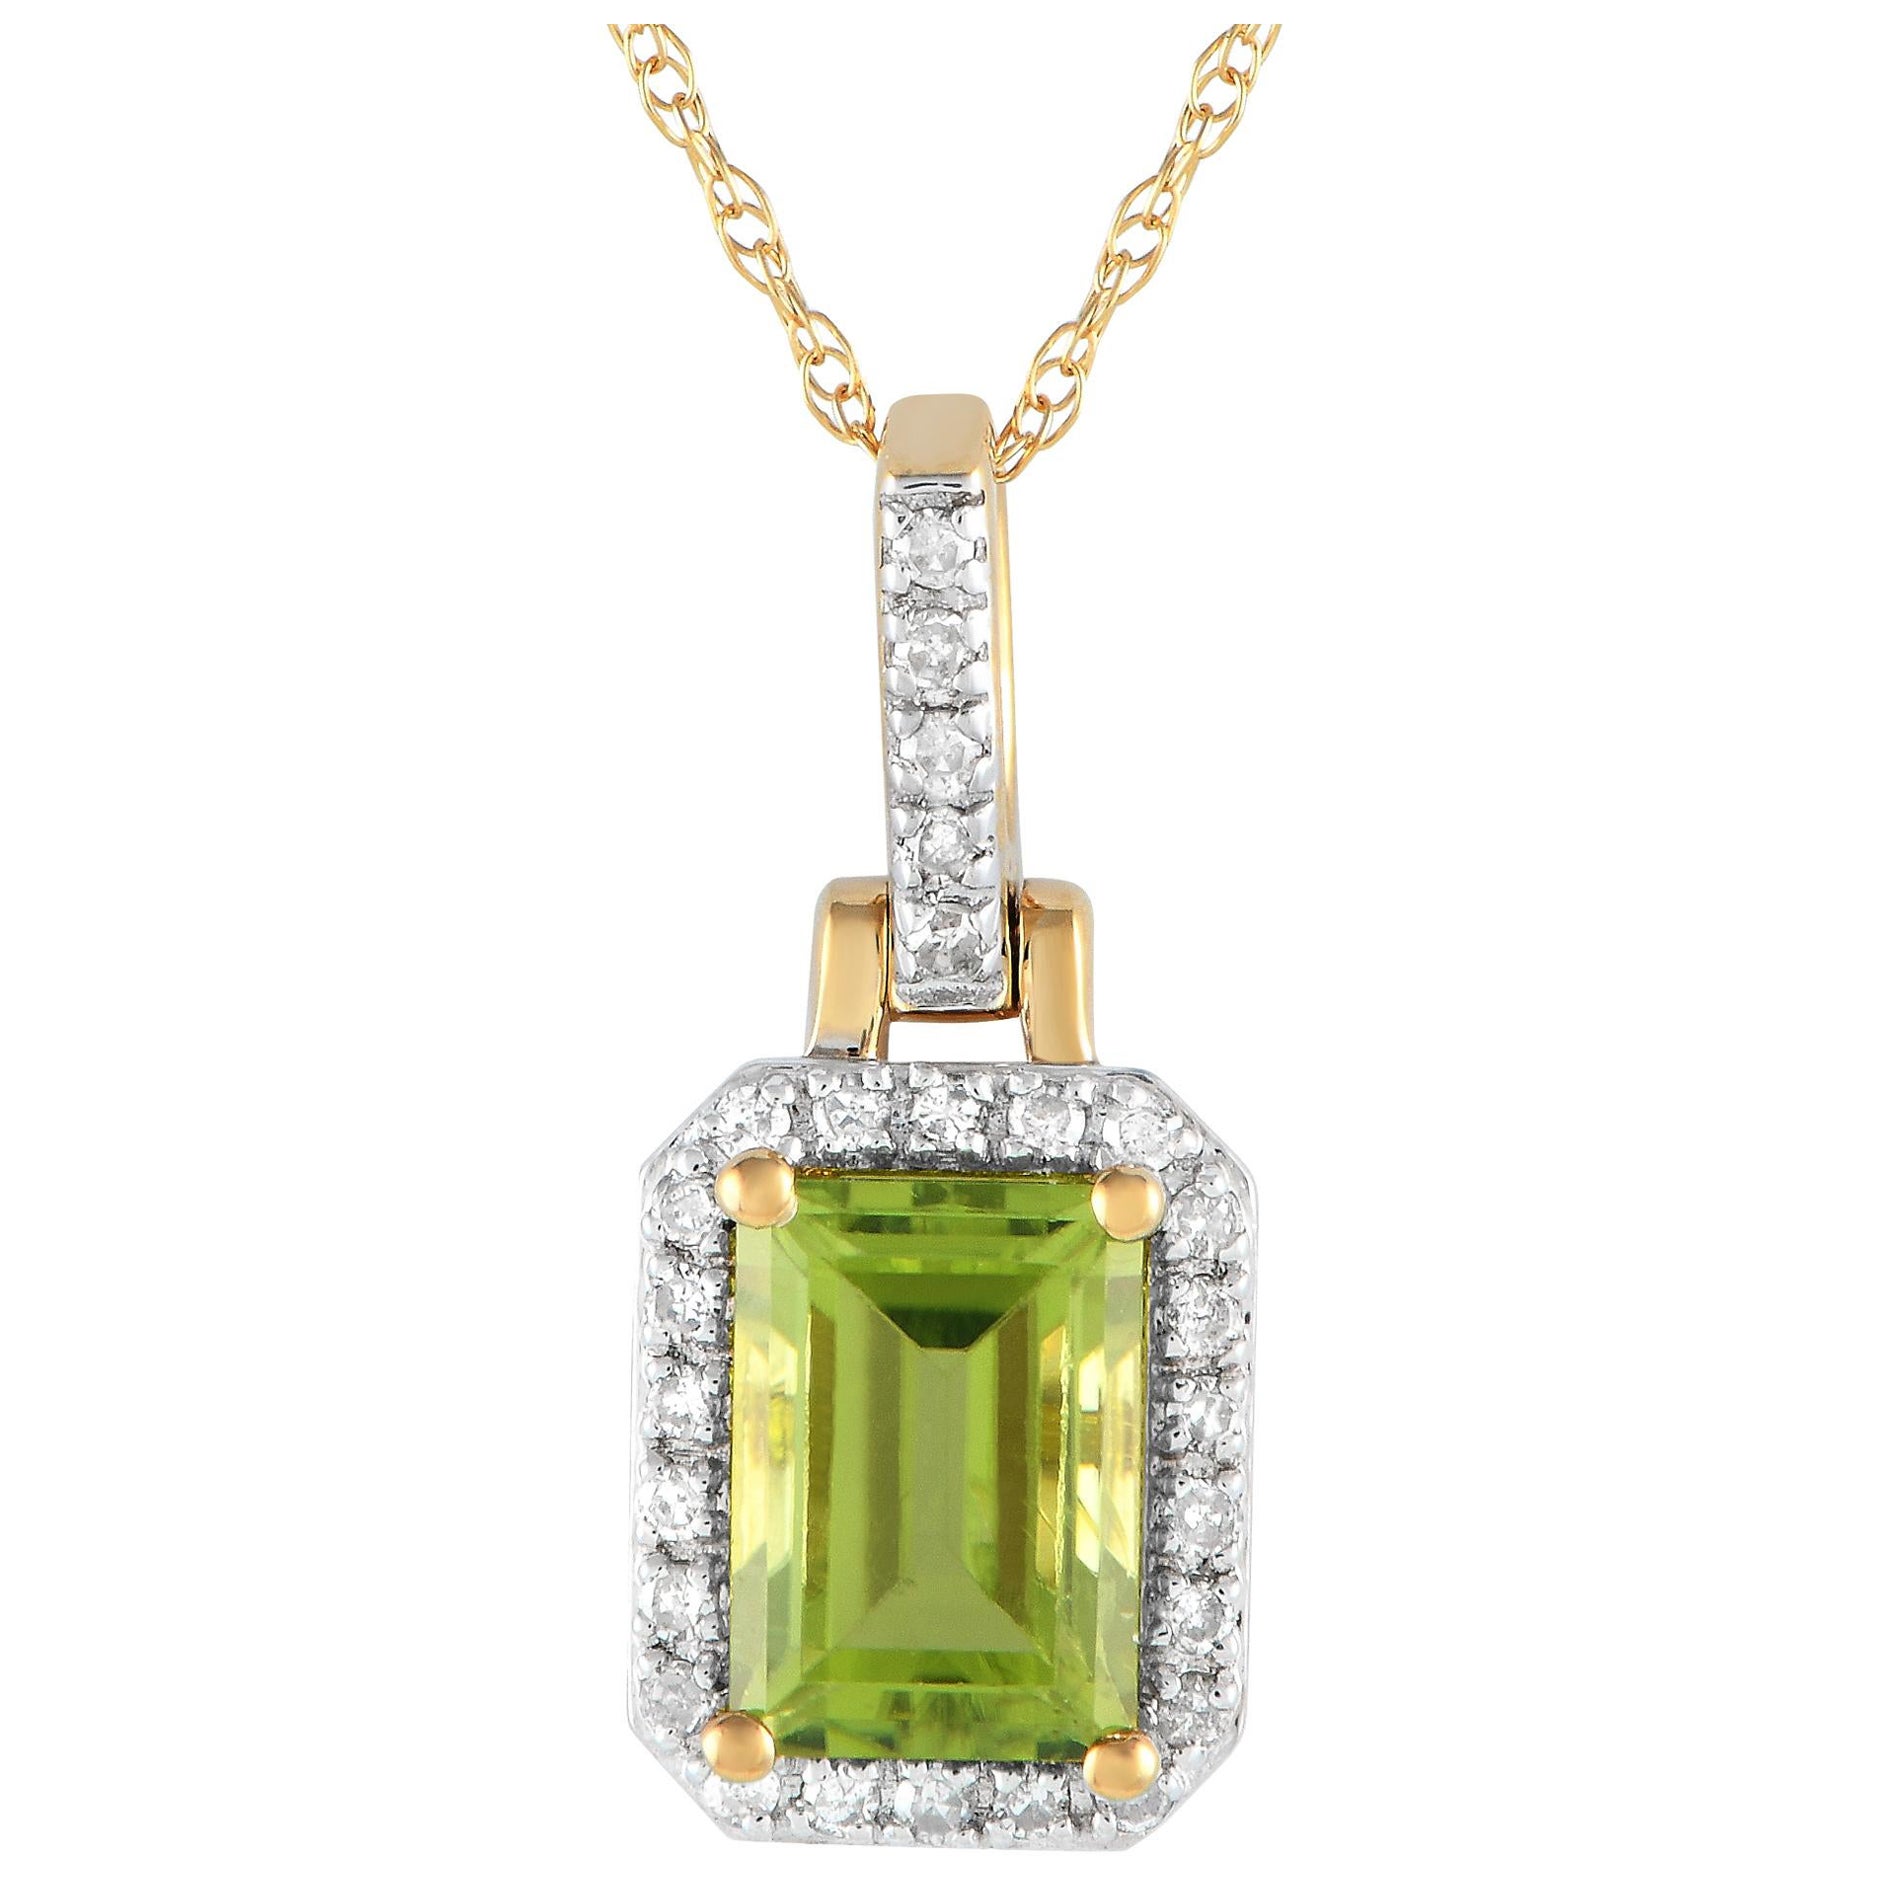 LB Exclusive 14K Yellow Gold 0.12ct Diamond Pendant Necklace PD4-15501YPE For Sale